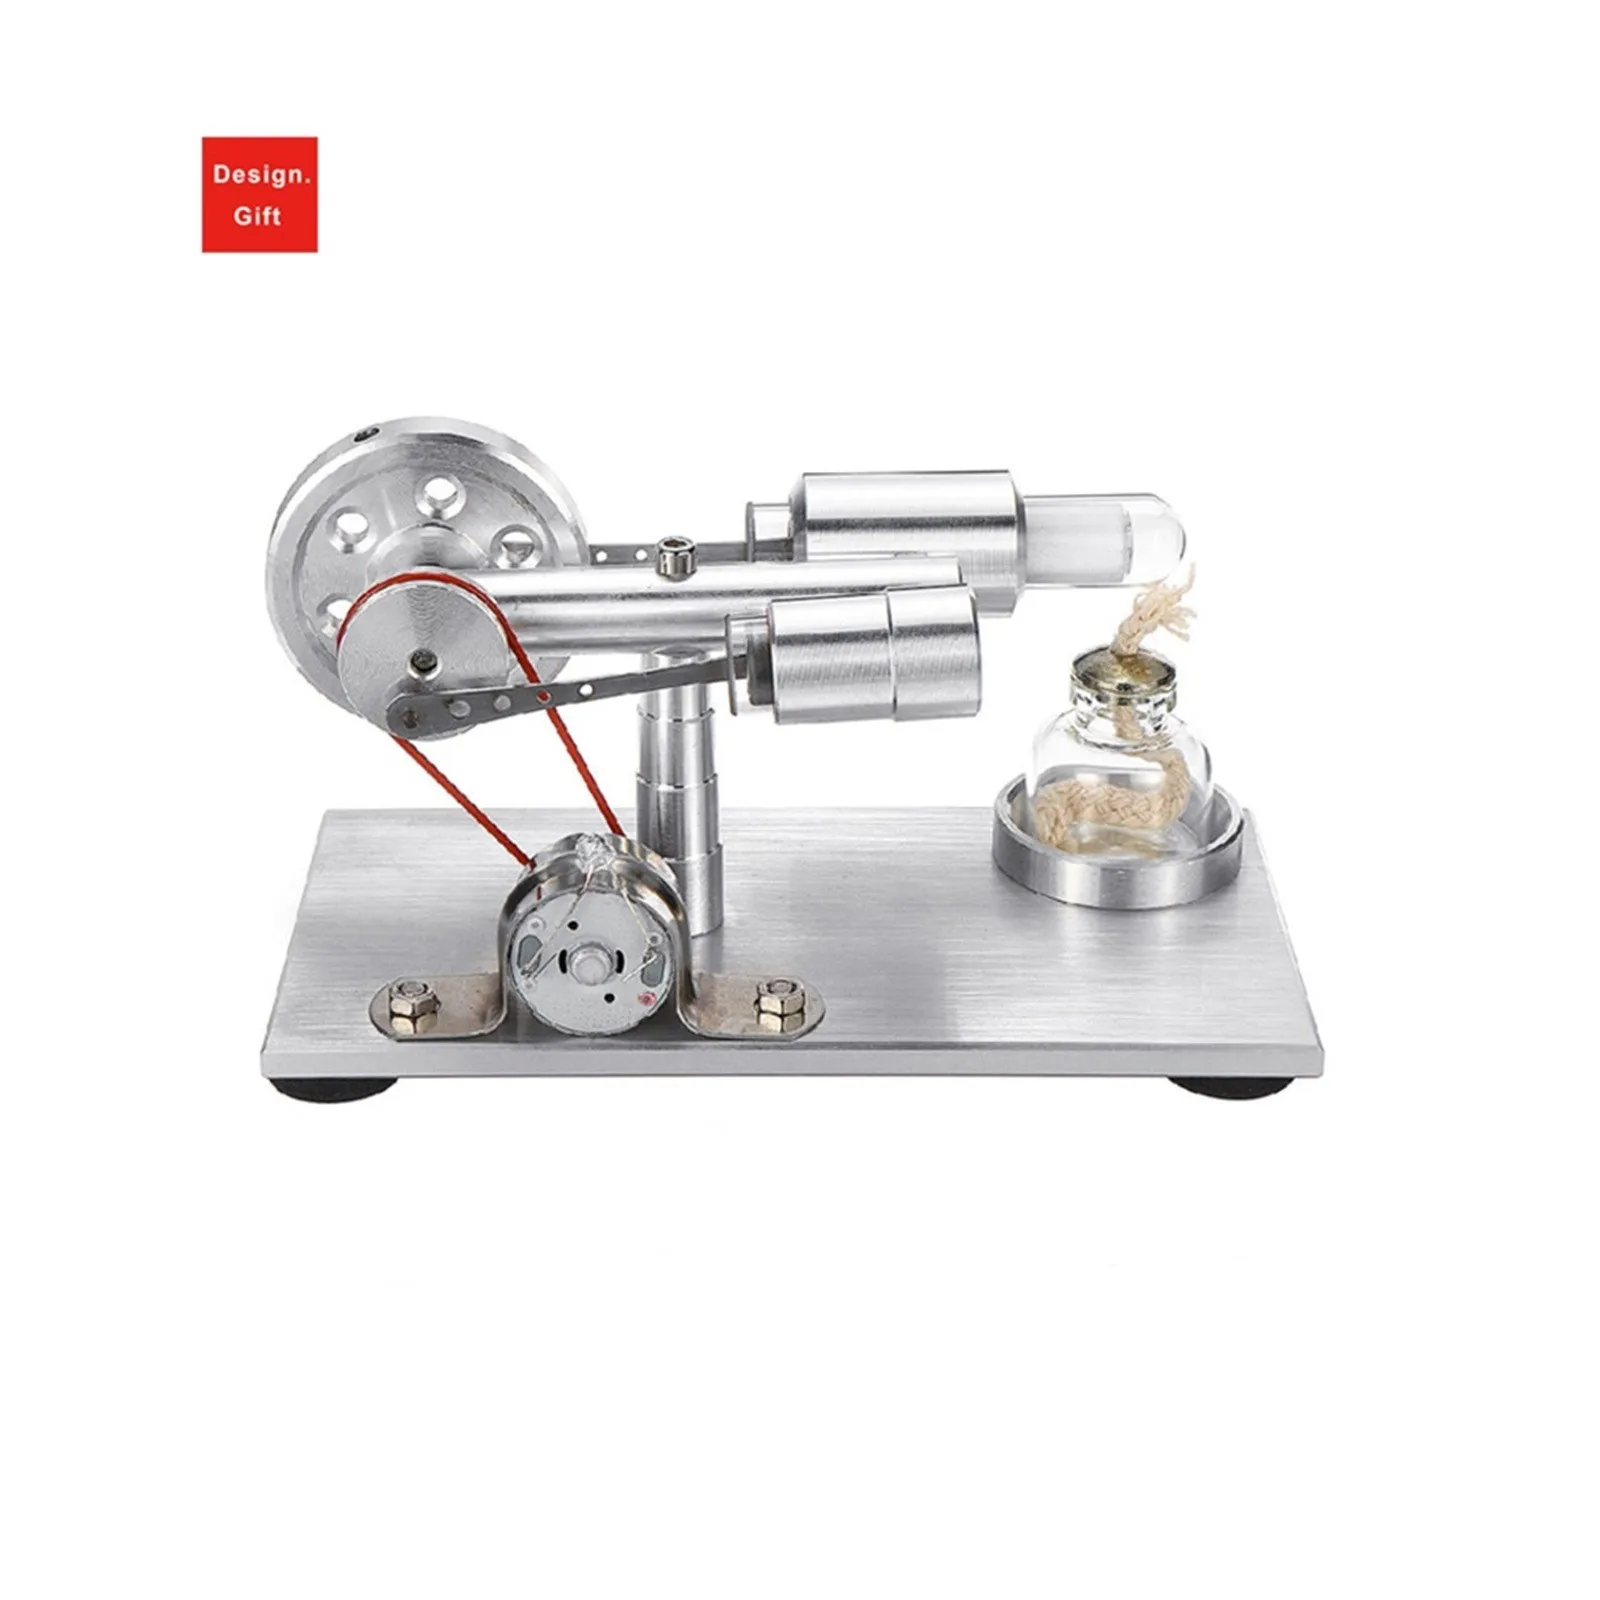 Hot Air Stirling Engine Motor Model Educational Toy Electricity Technology 